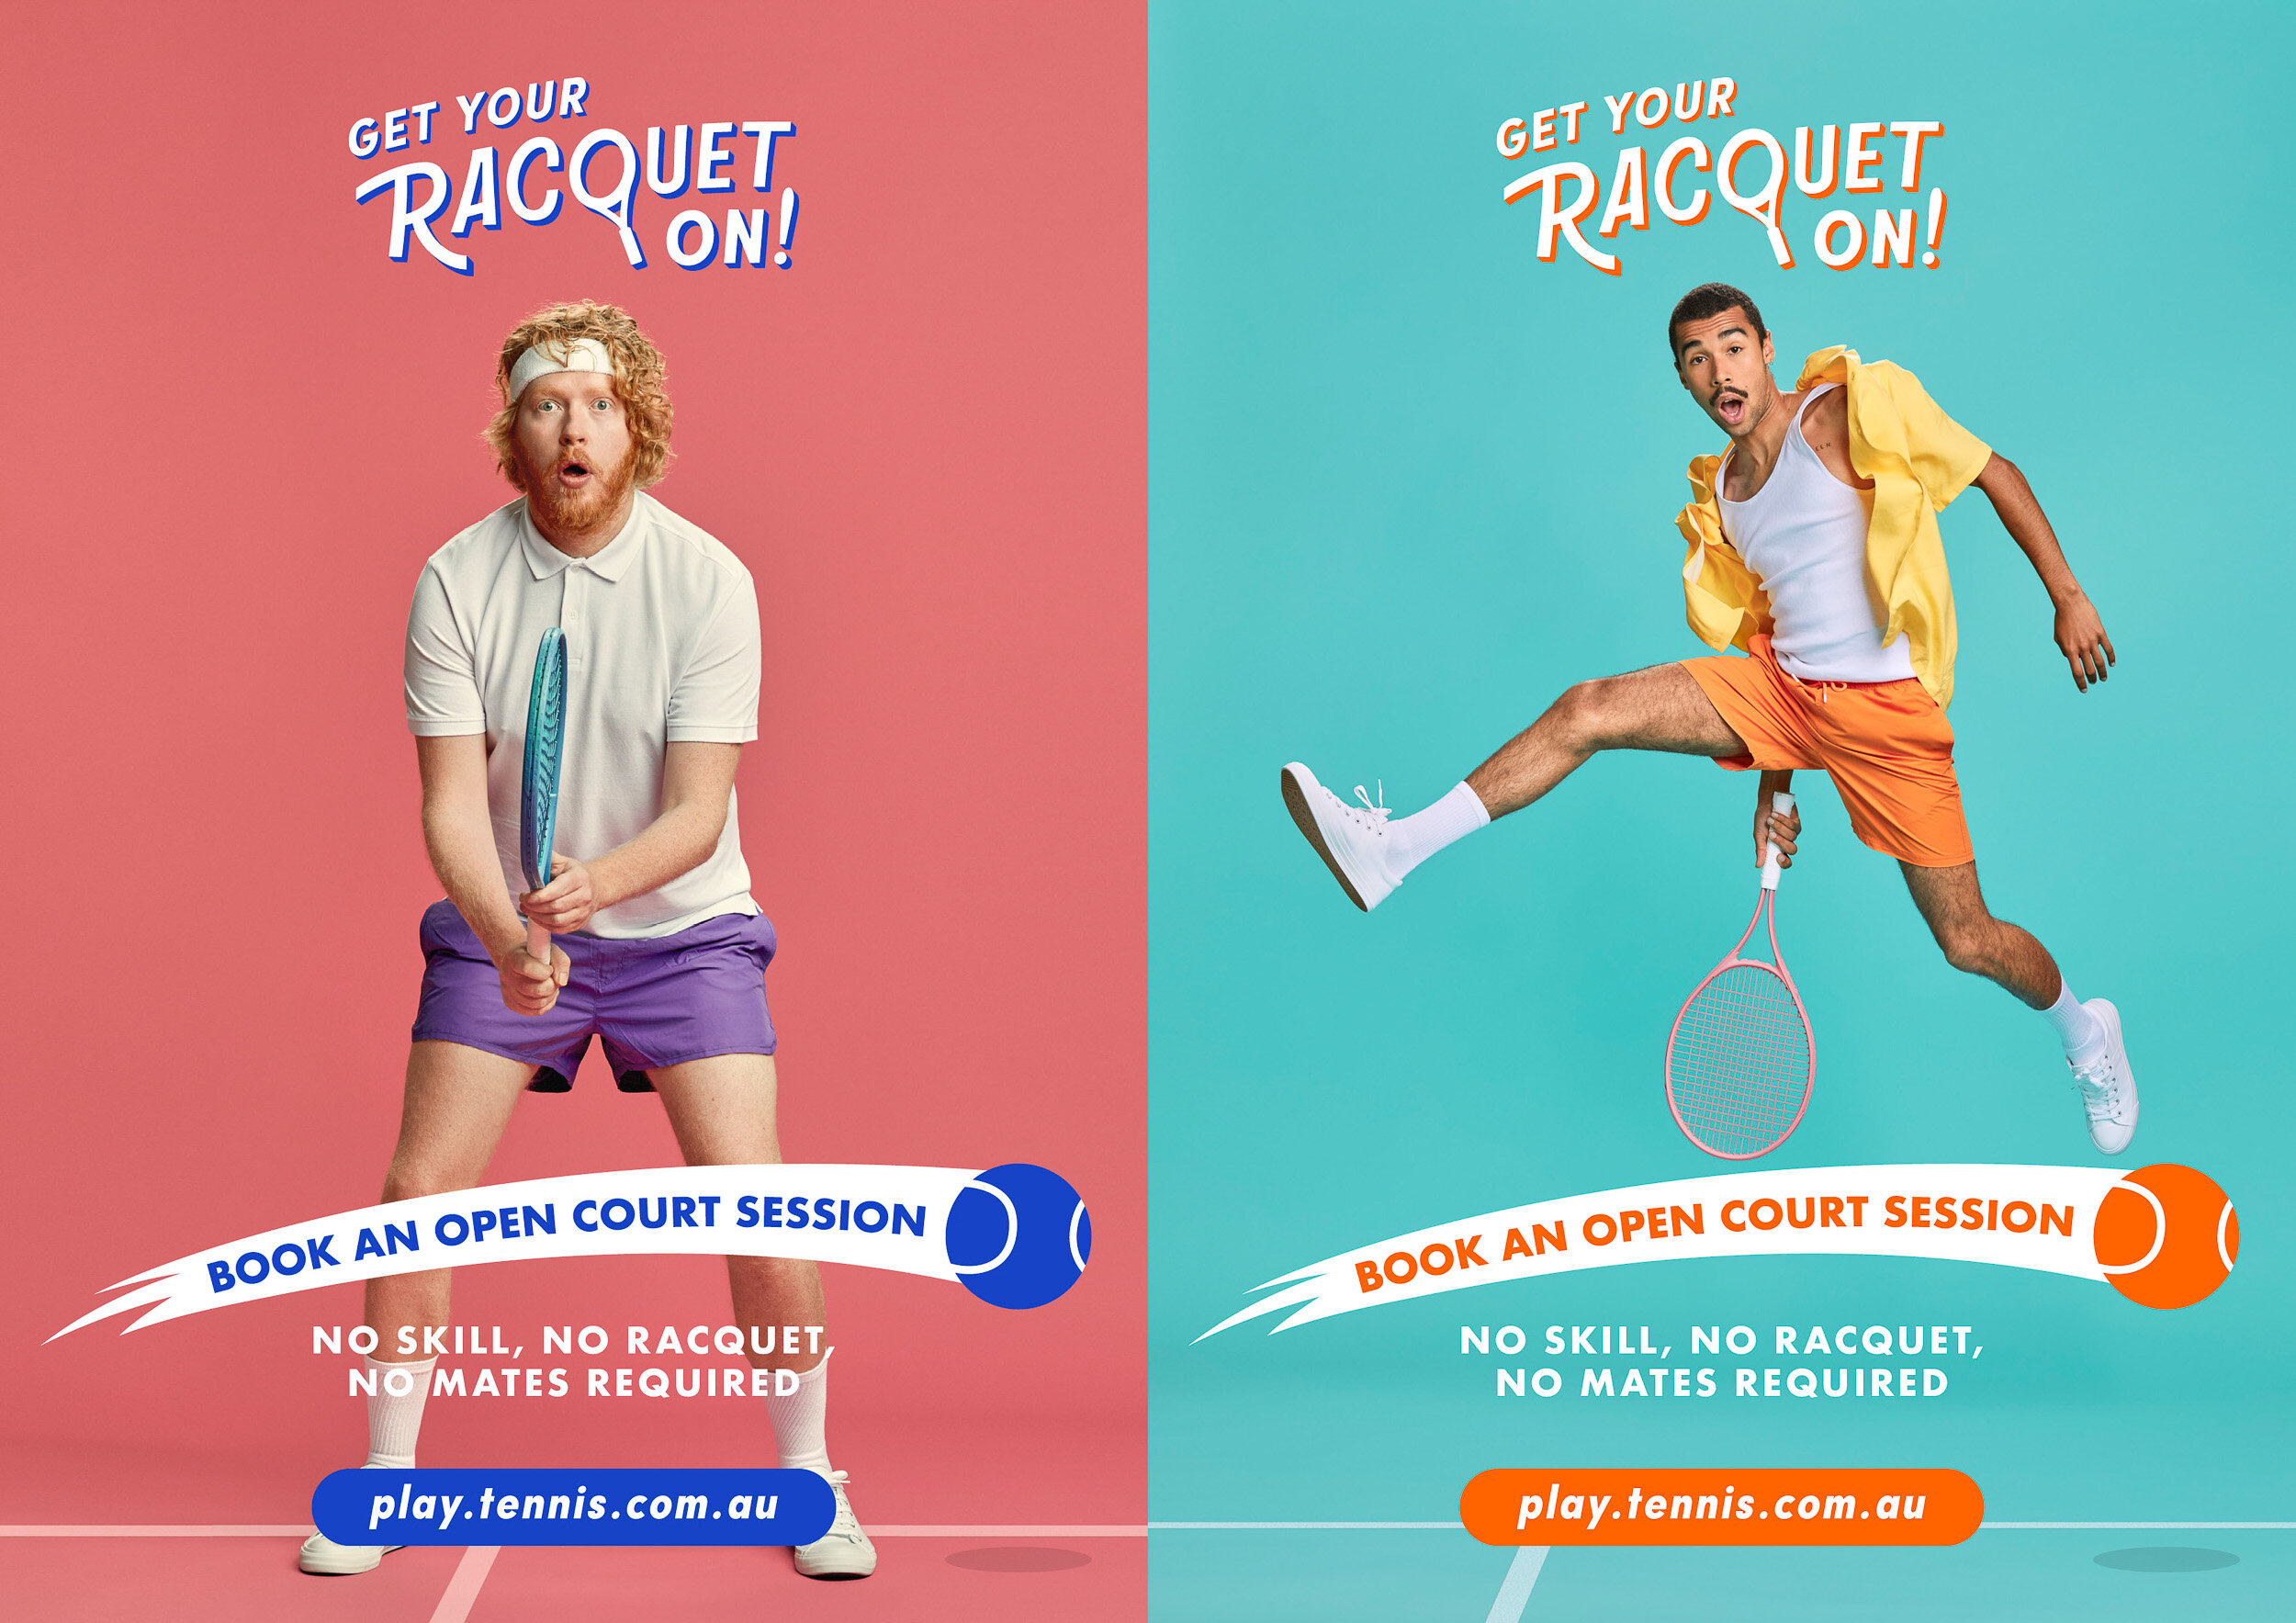 Tennis Australia - Get Your Racquet On advertising campaign